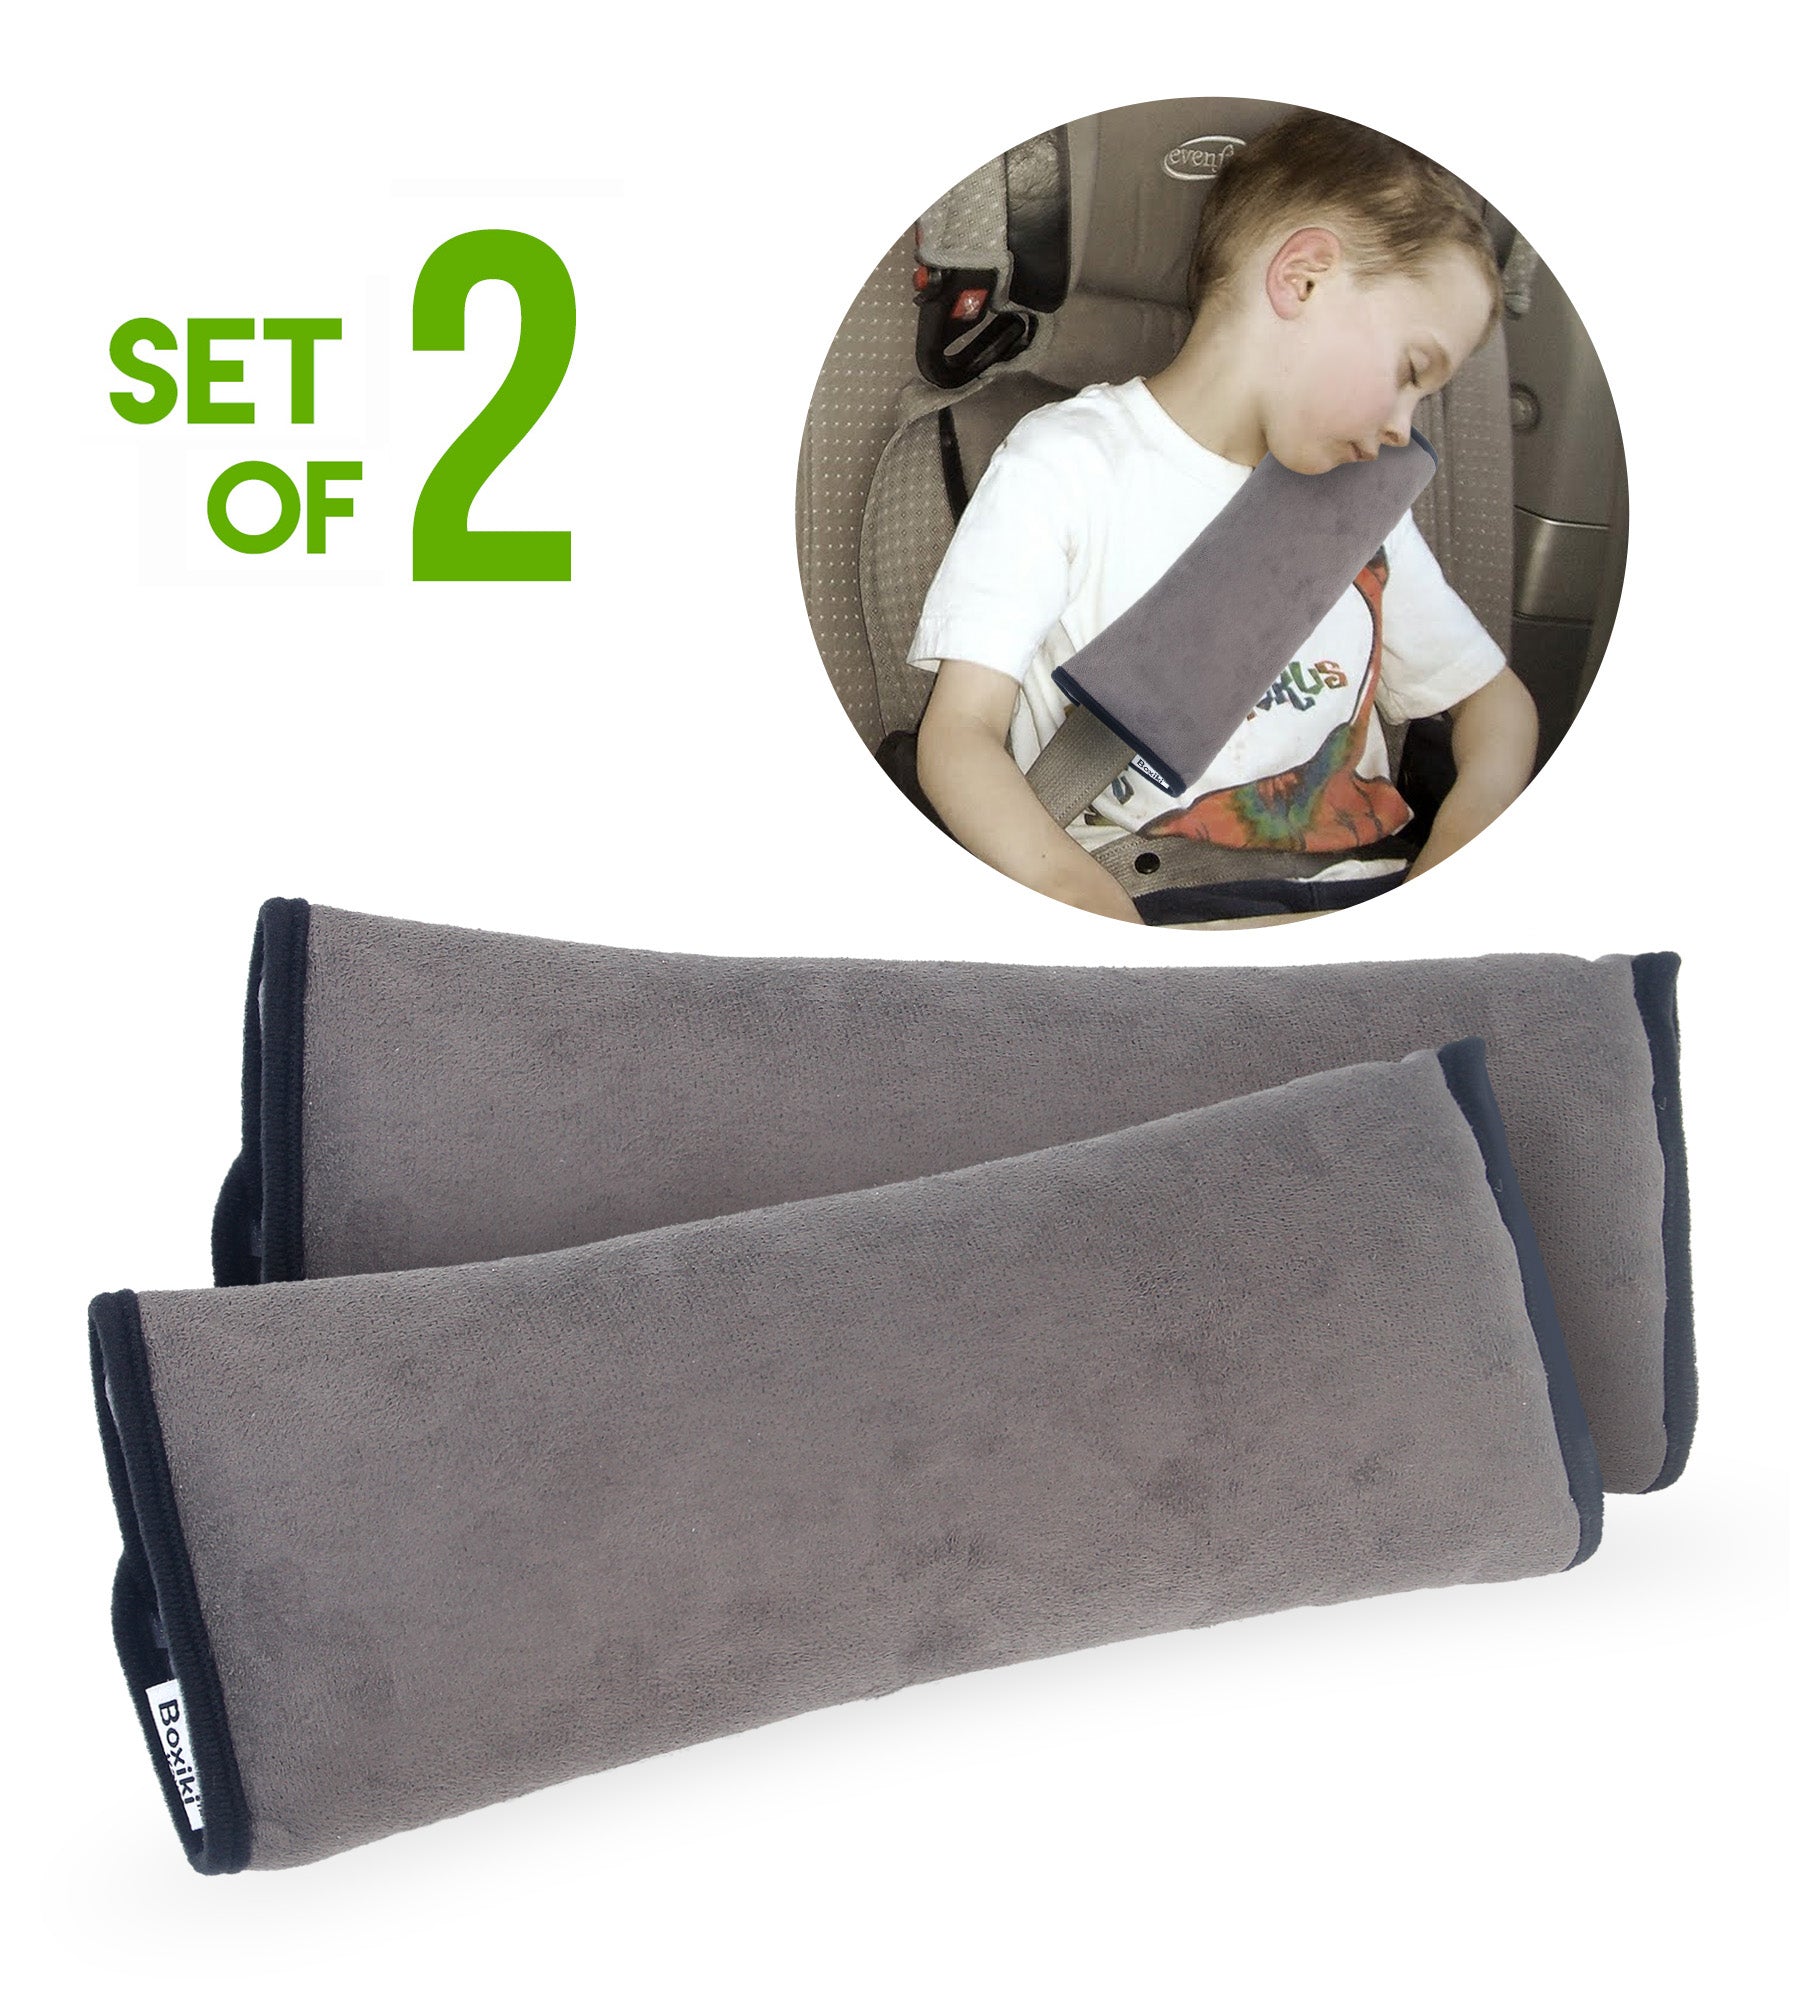 Set of 2 Seatbelt Cover Pillows | Head Support Pillow for Car Travel | Seat Belt